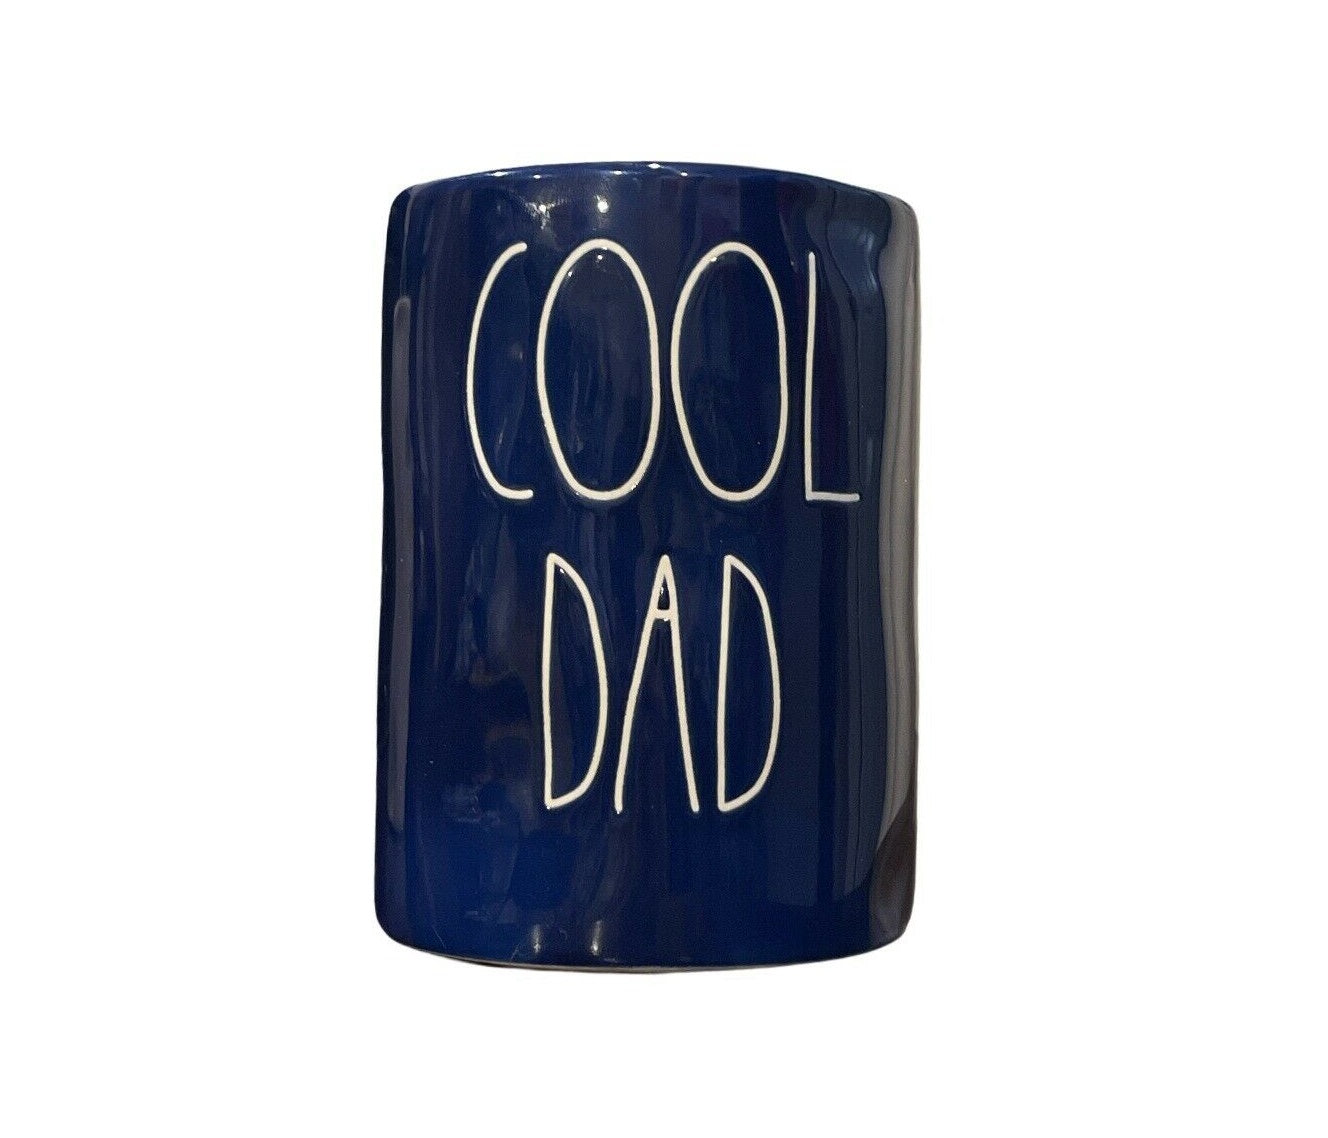 Rae Dunn COOL DAD Blue Candle Spice Sandalwood